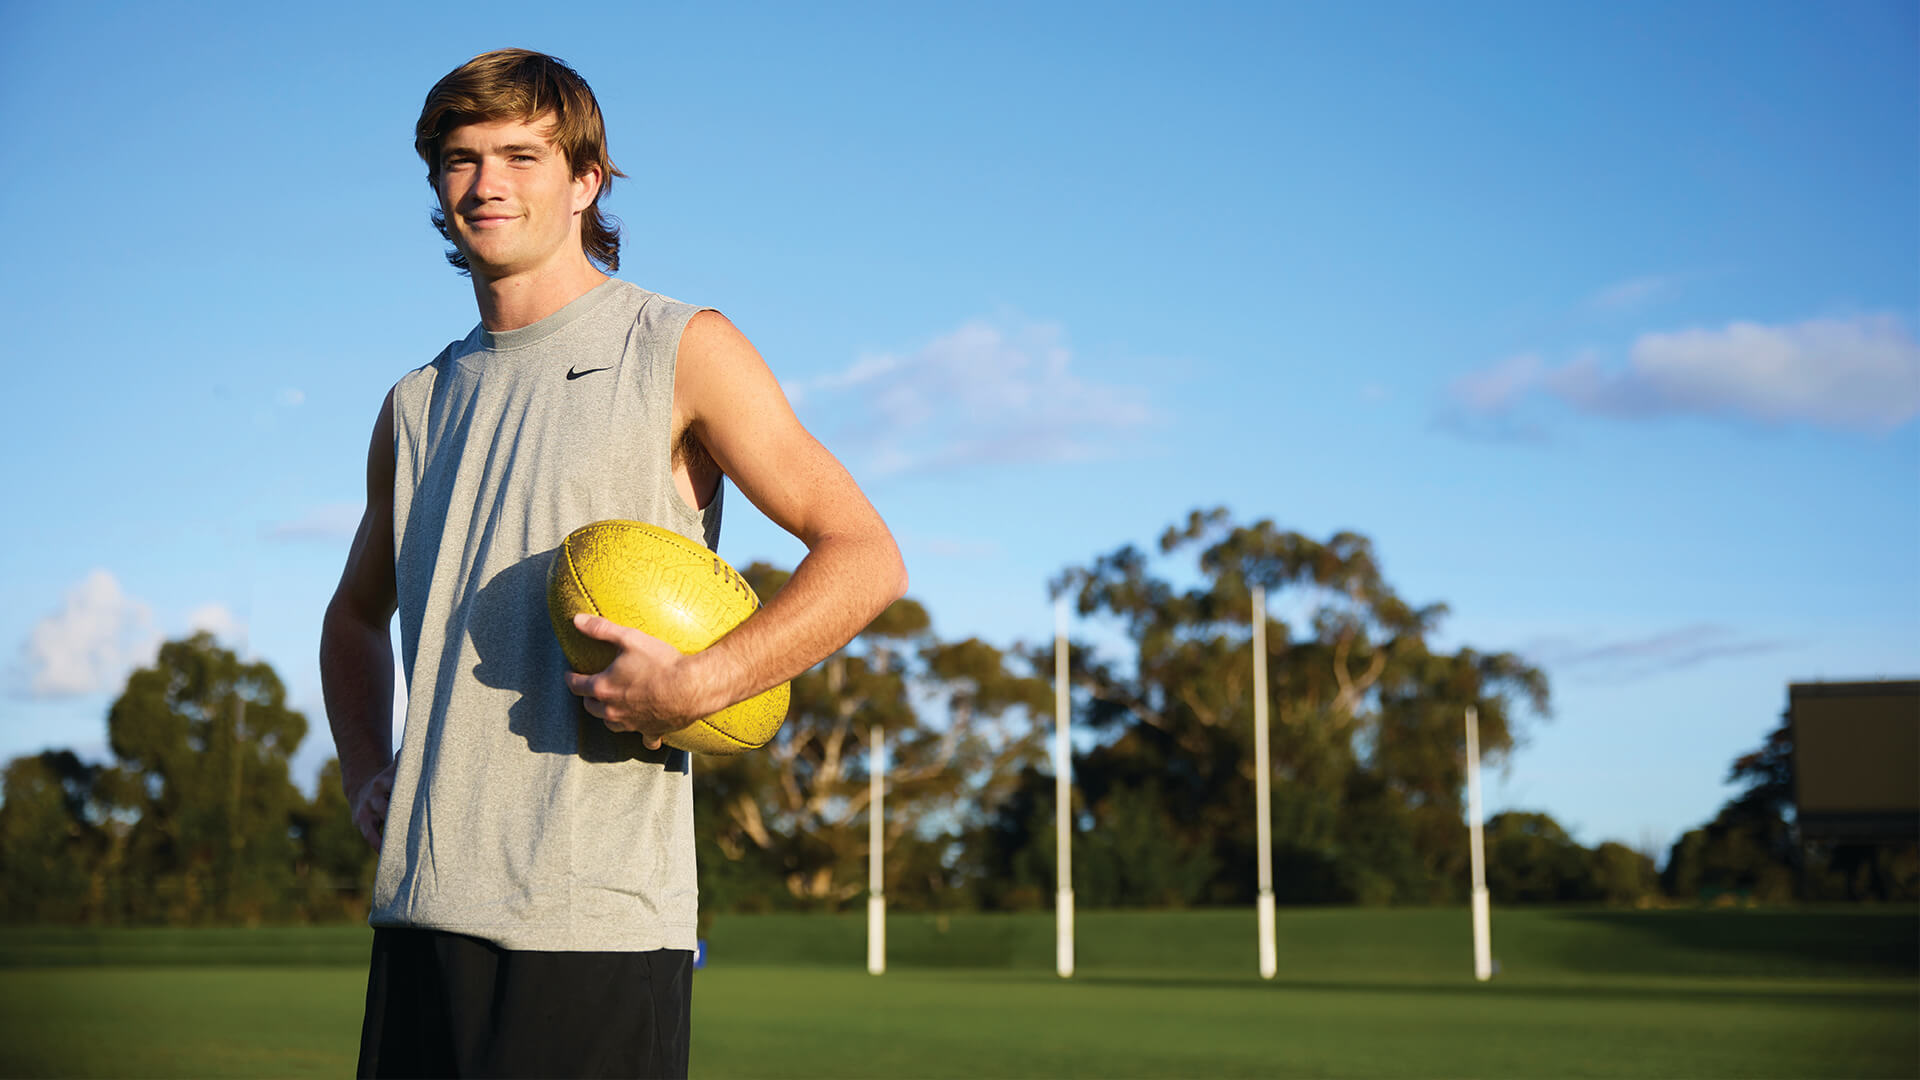 gluten-free-athlete and AFL player Angus Hanrahan